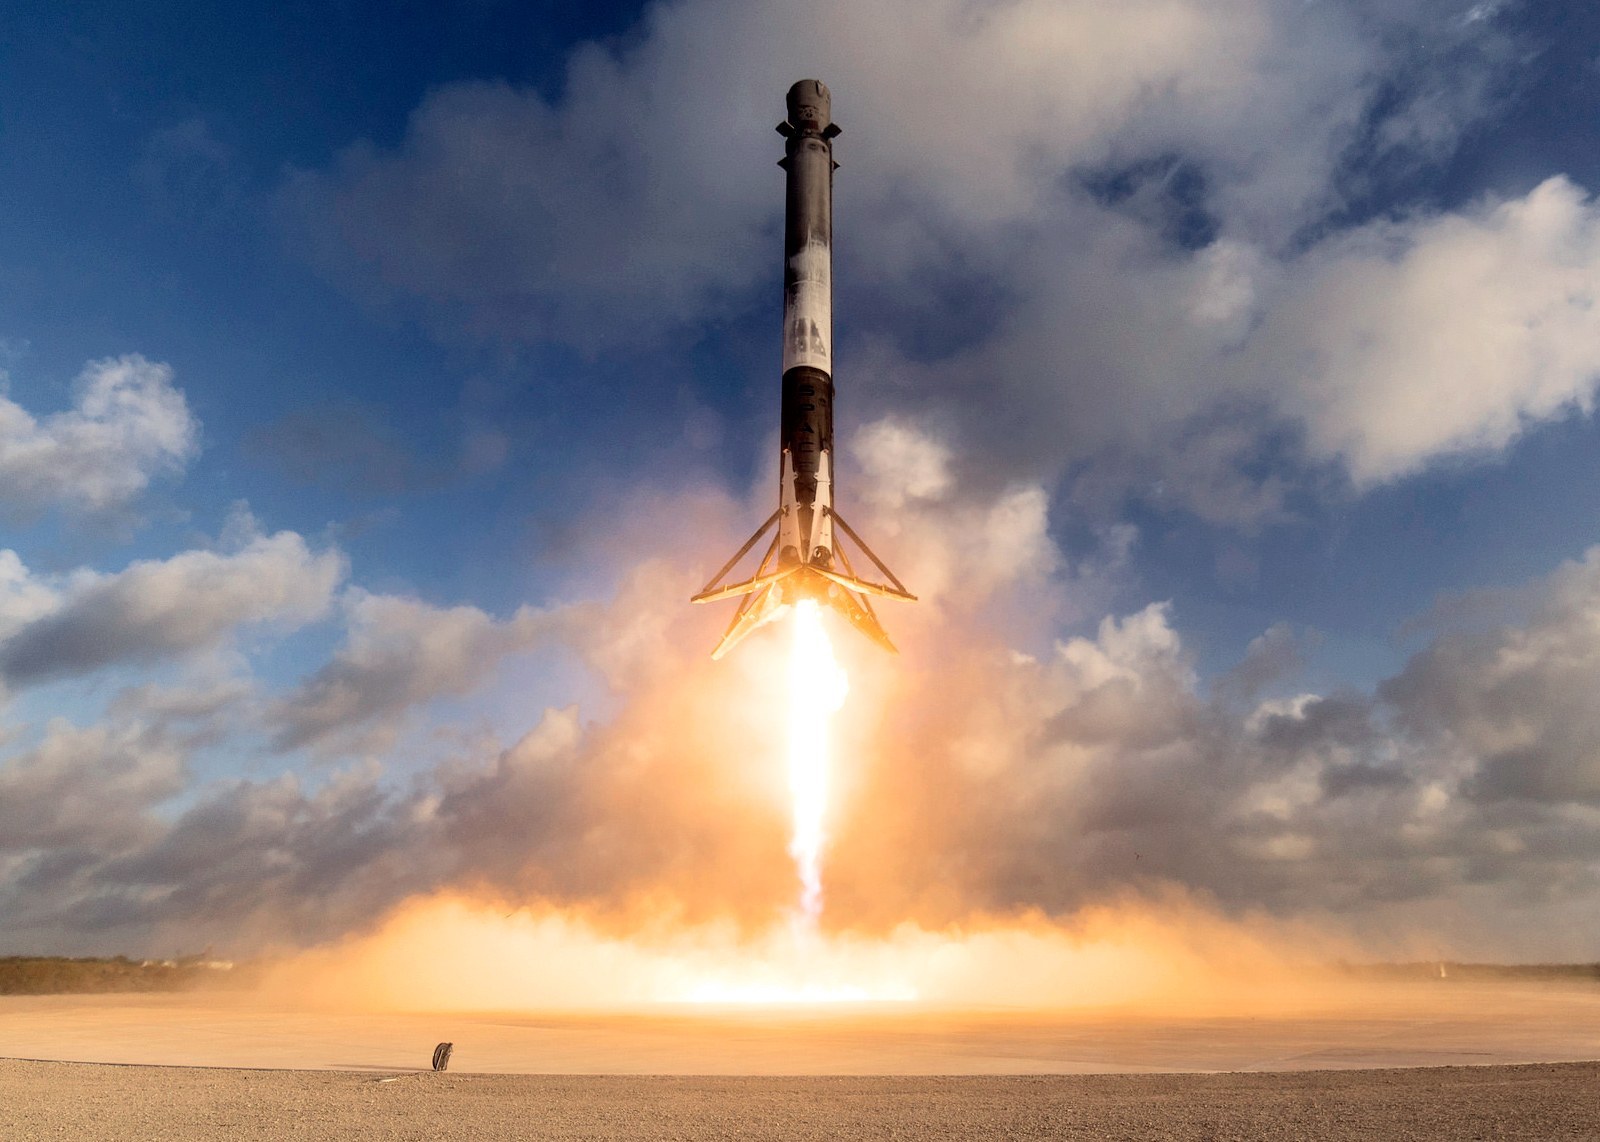 No American Has Got a Perfect Score on This Quiz Without Cheating spacex